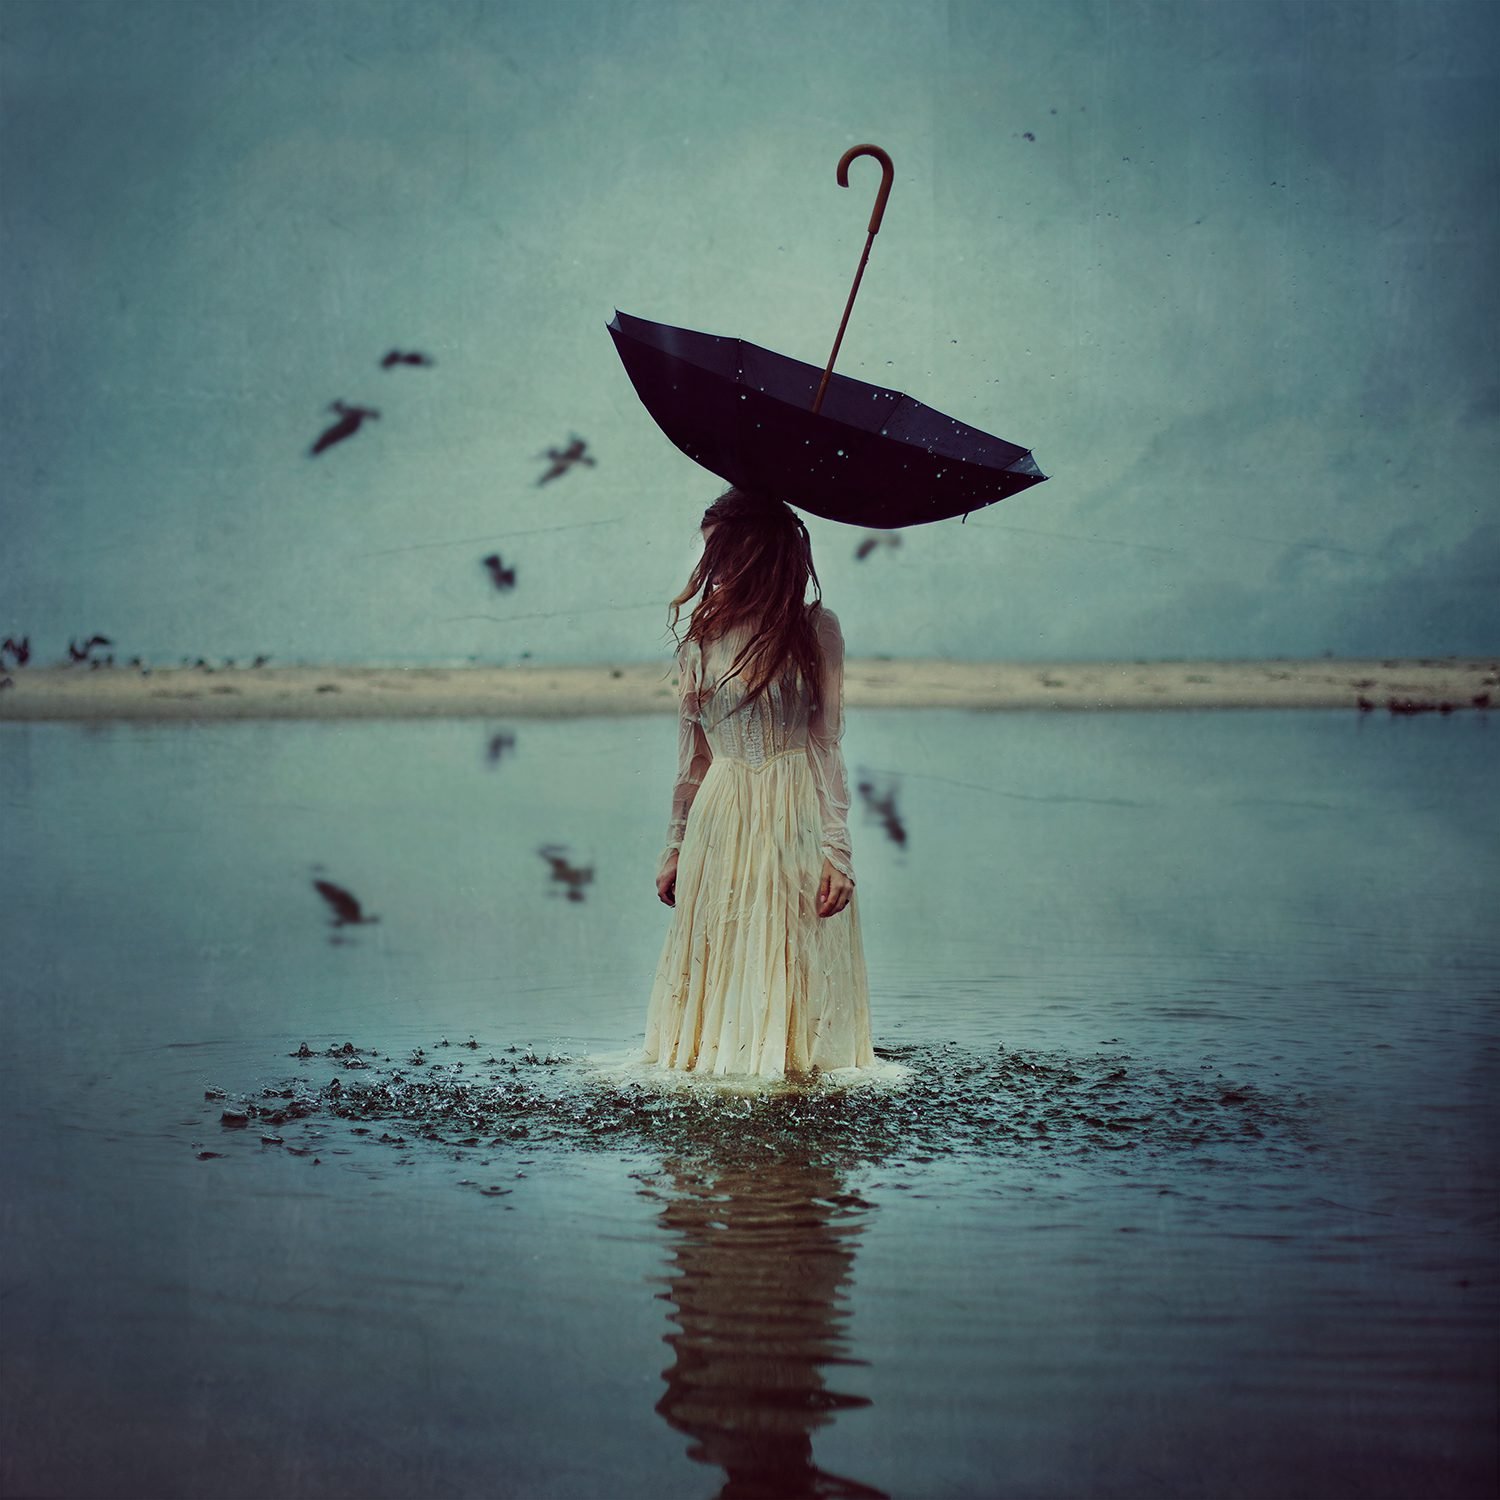 The World Above by Brooke Shaden